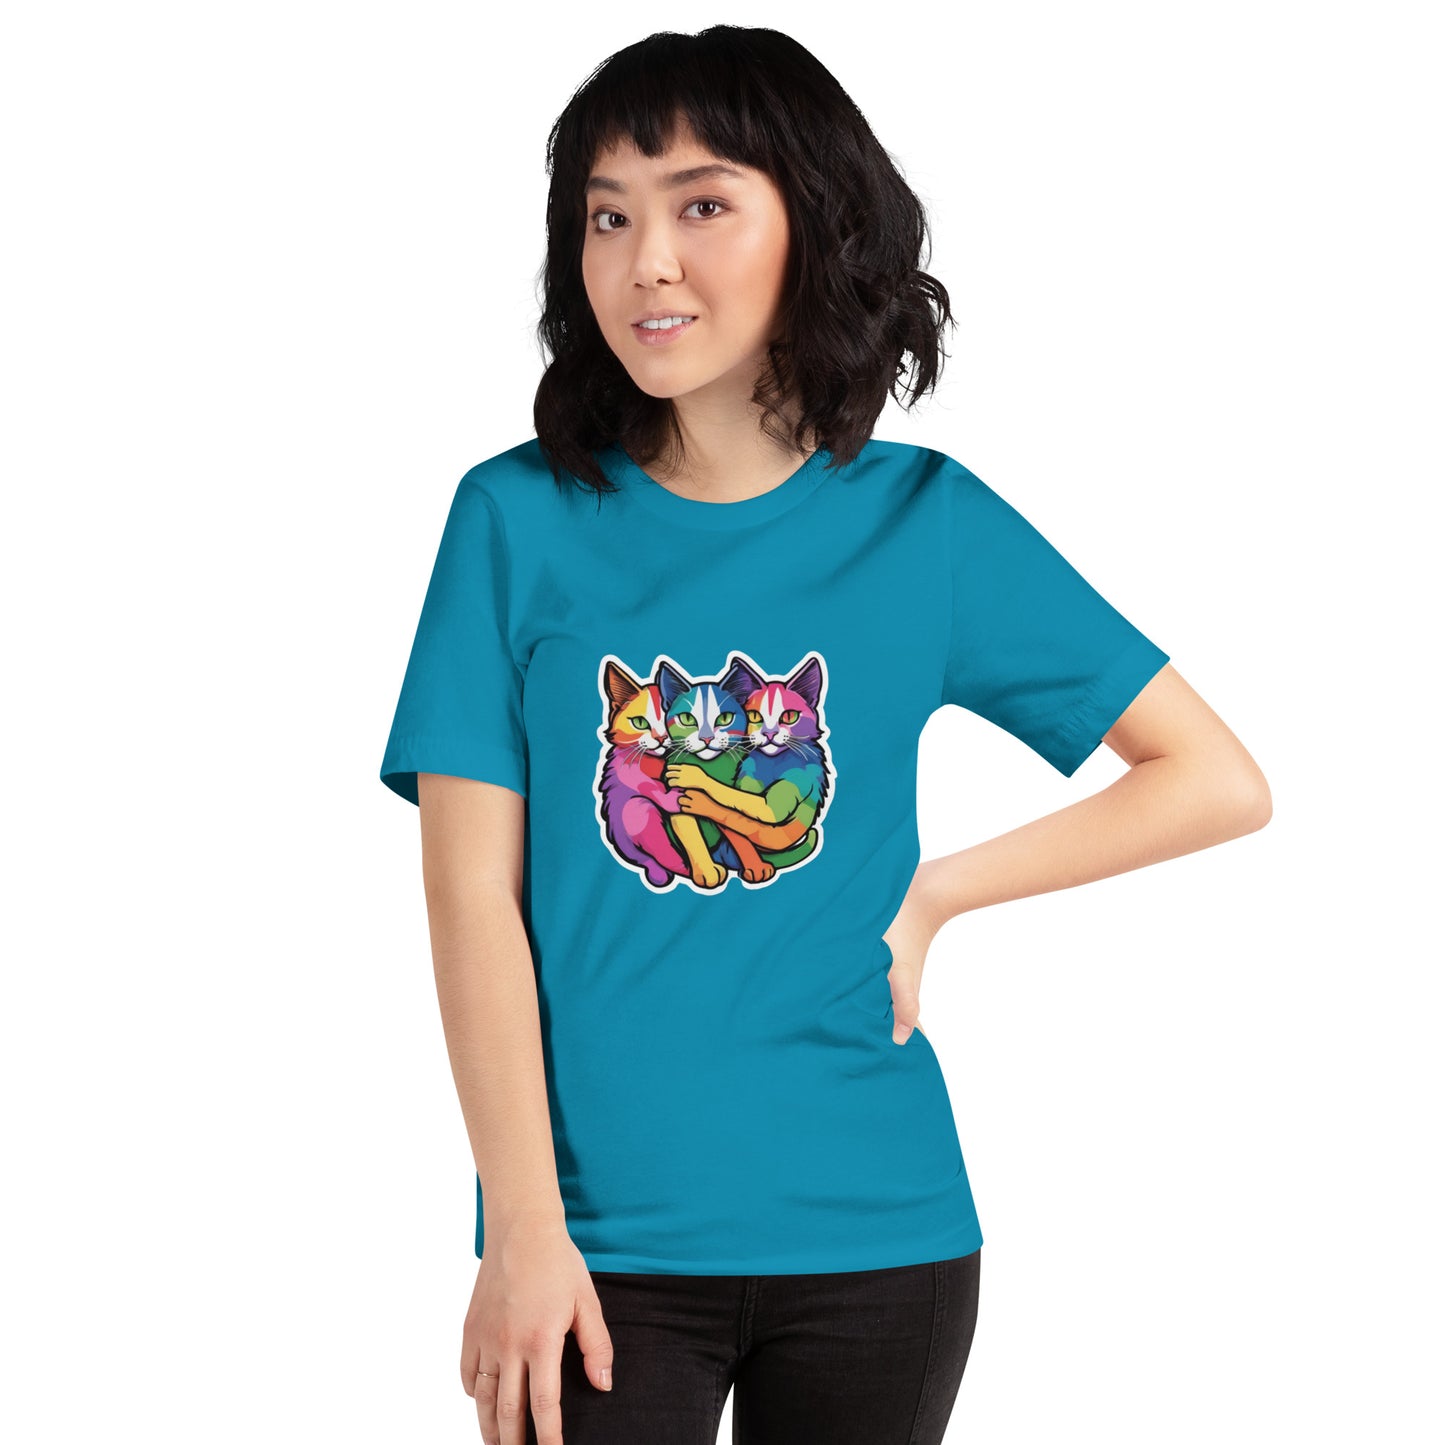 Plus Size LGBTQ Pride Tee - 2XL, 3XL, 4XL Sizing Available - Pride Parade Outfit